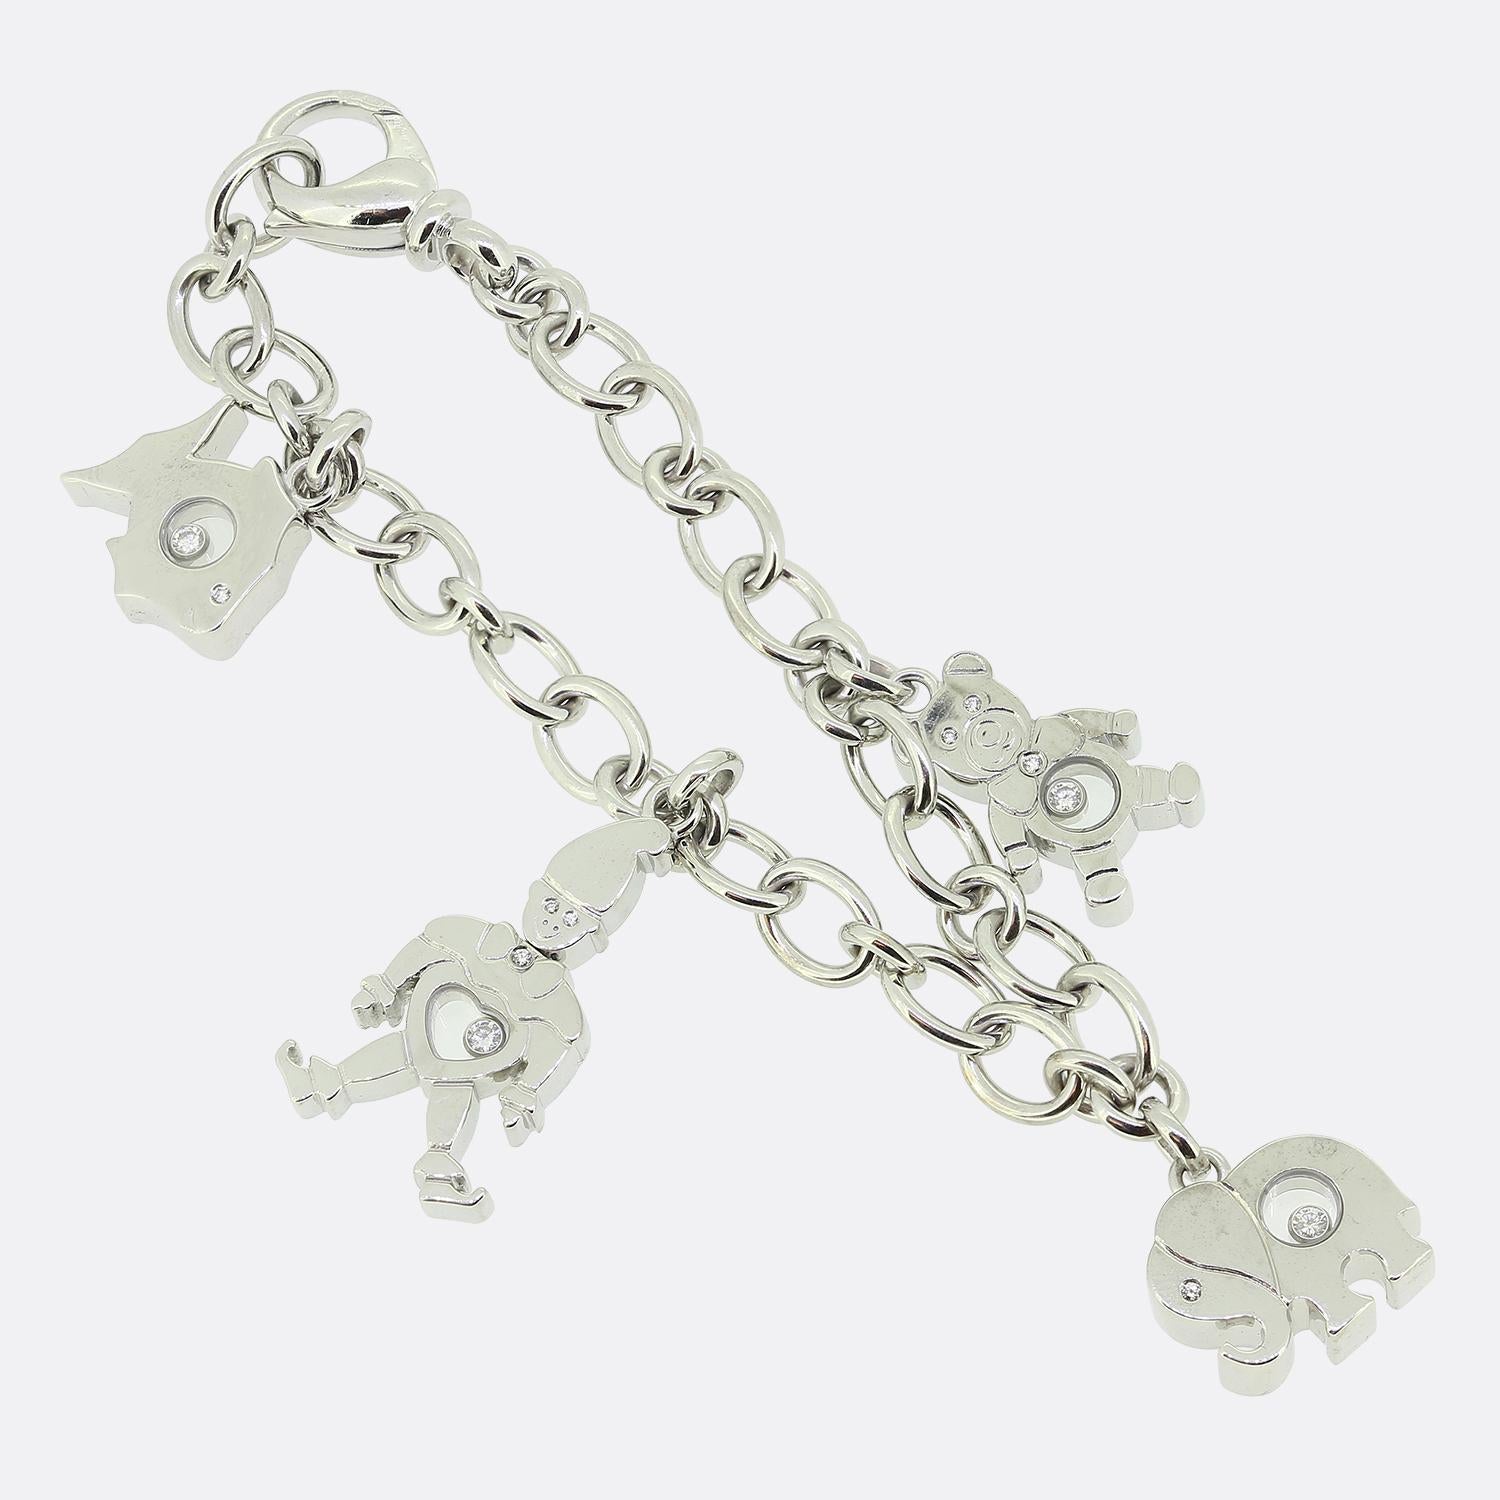 This is a wonderful charm bracelet from the world renowned luxury jewellery designer, Chopard. Crafted in 18ct white gold, this belcher style link bracelet features four large charms; A fish, a teddy bear, an elephant and a clown. Each of the charms